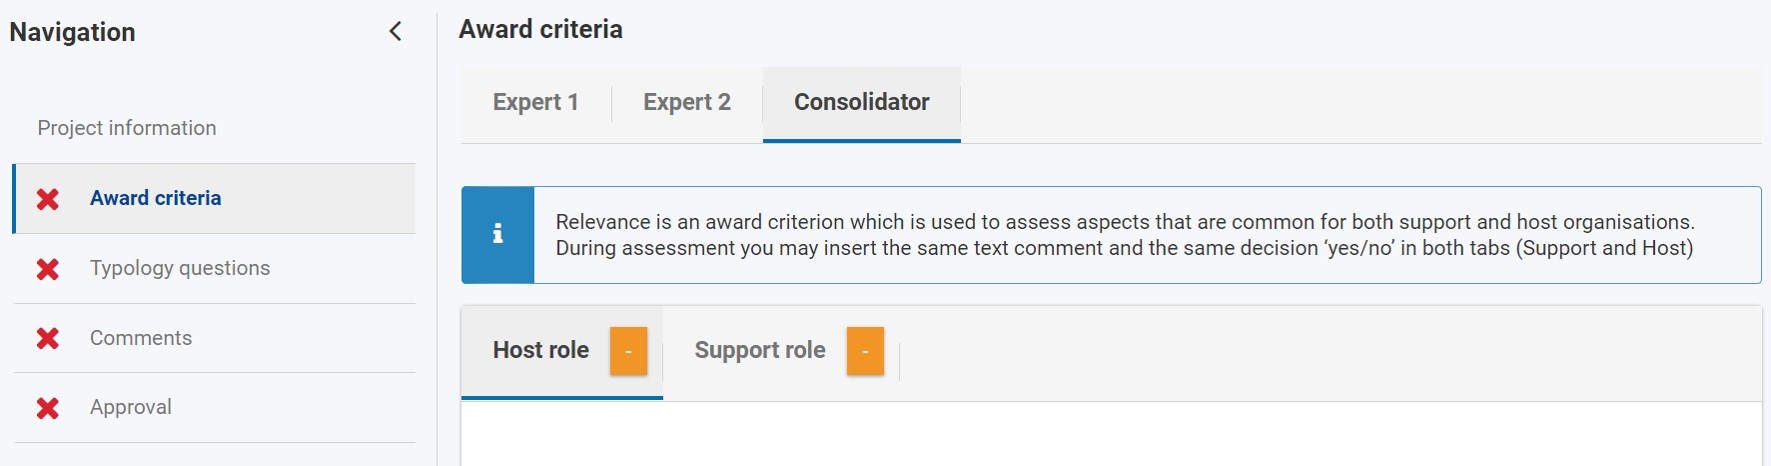 Sub tabs per role requested are available in the Consolidator assignment